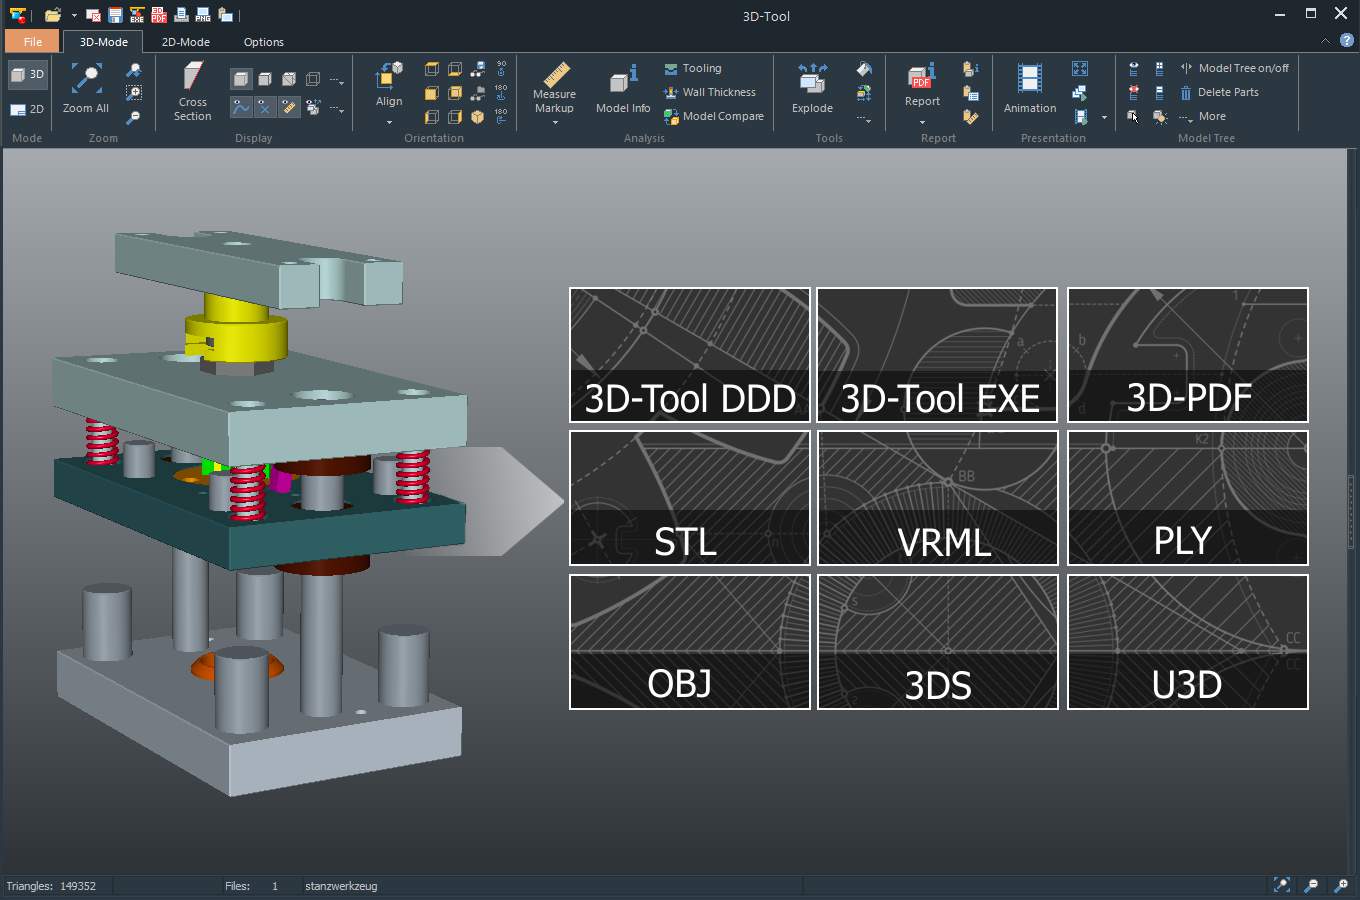 The 3D tool CAD Viewer facilitates collaboration and coordination within the company